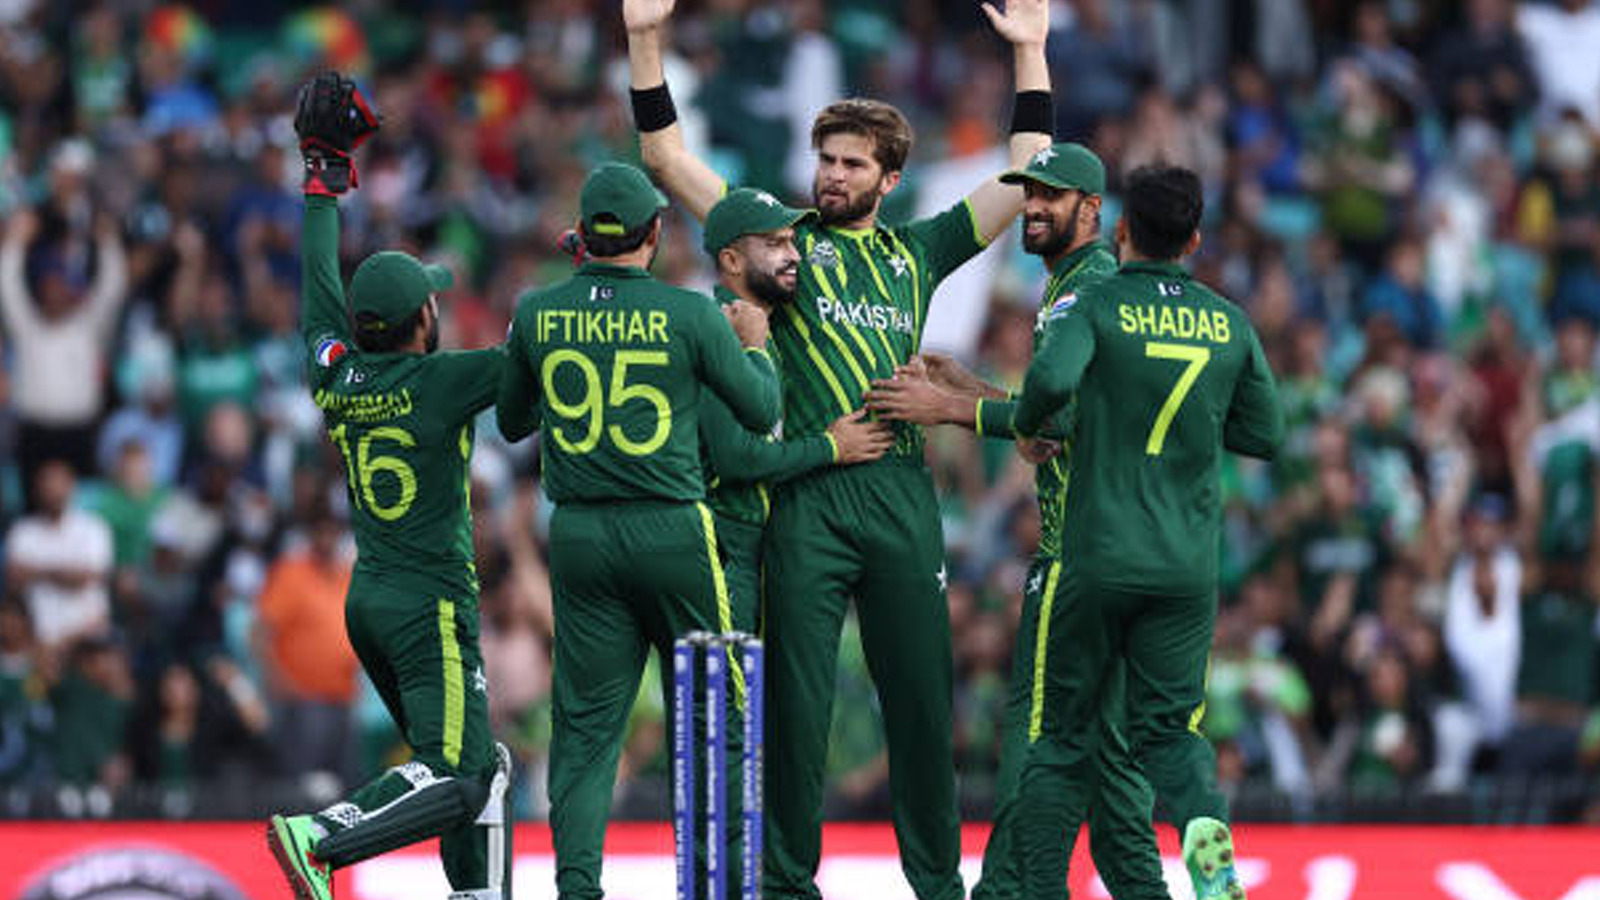 Team Pakistan | Image: Gettyimages